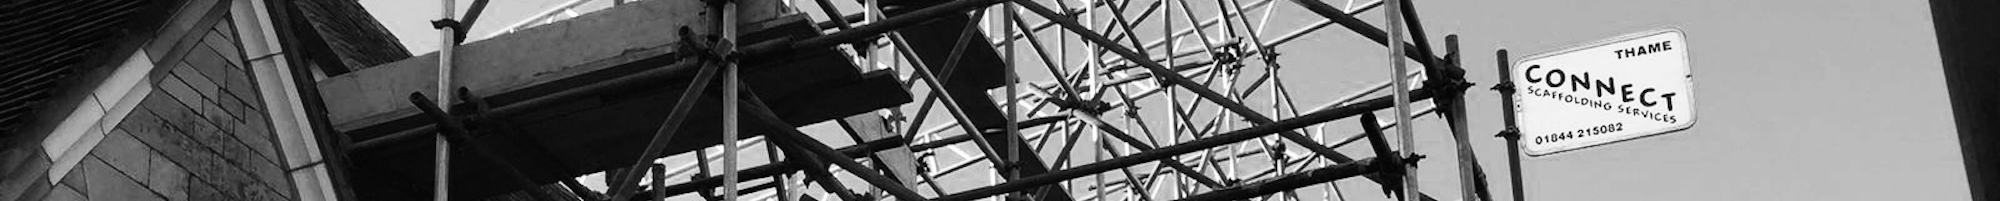 About Connect Scaffolding Services in Thame Oxfordshire